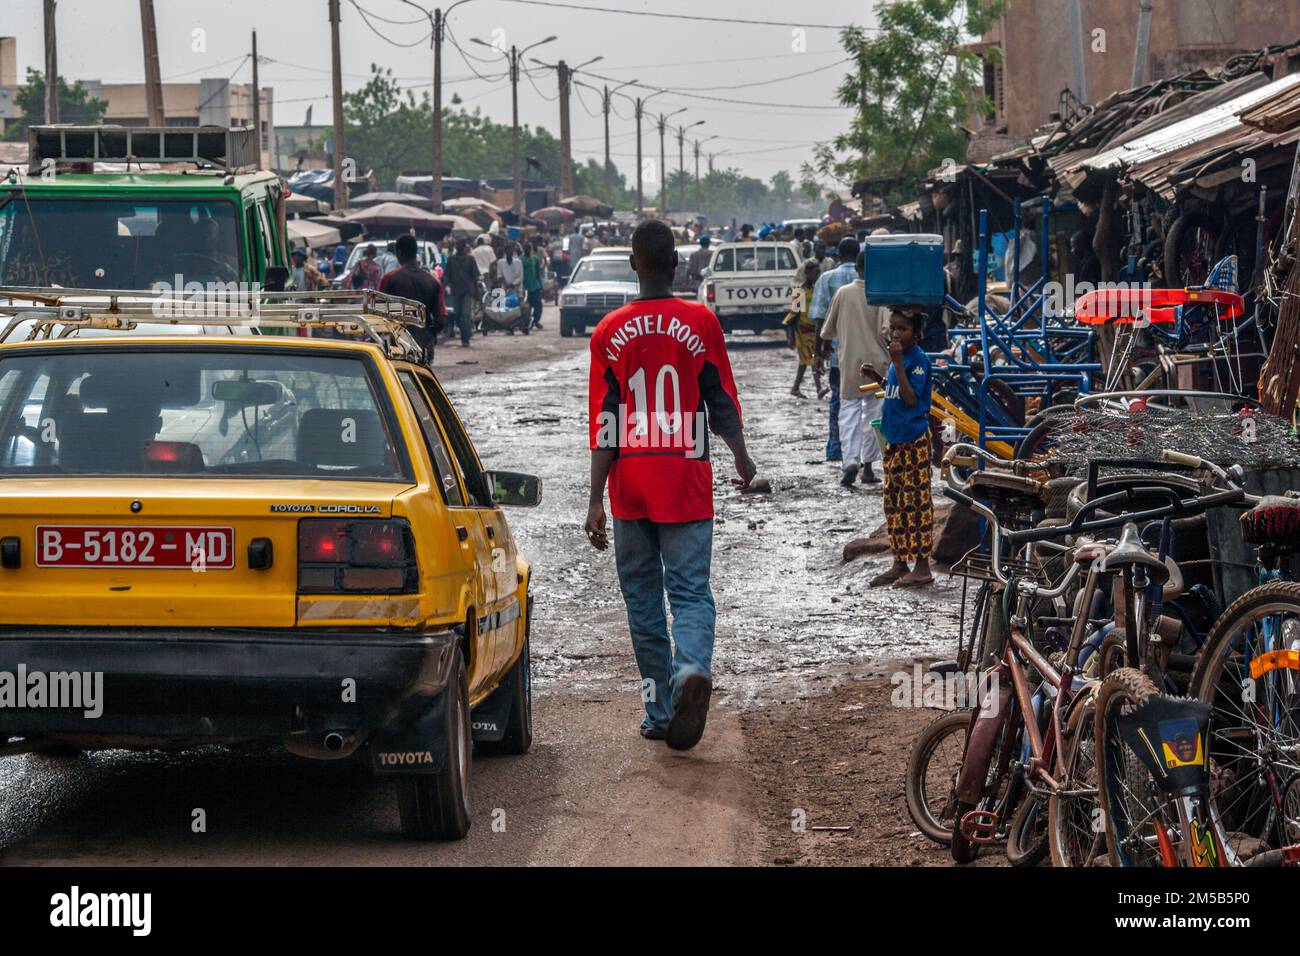 Local African boy with bright red Manchester United football shirt in Bamako ,Mali, West Africa. Stock Photo